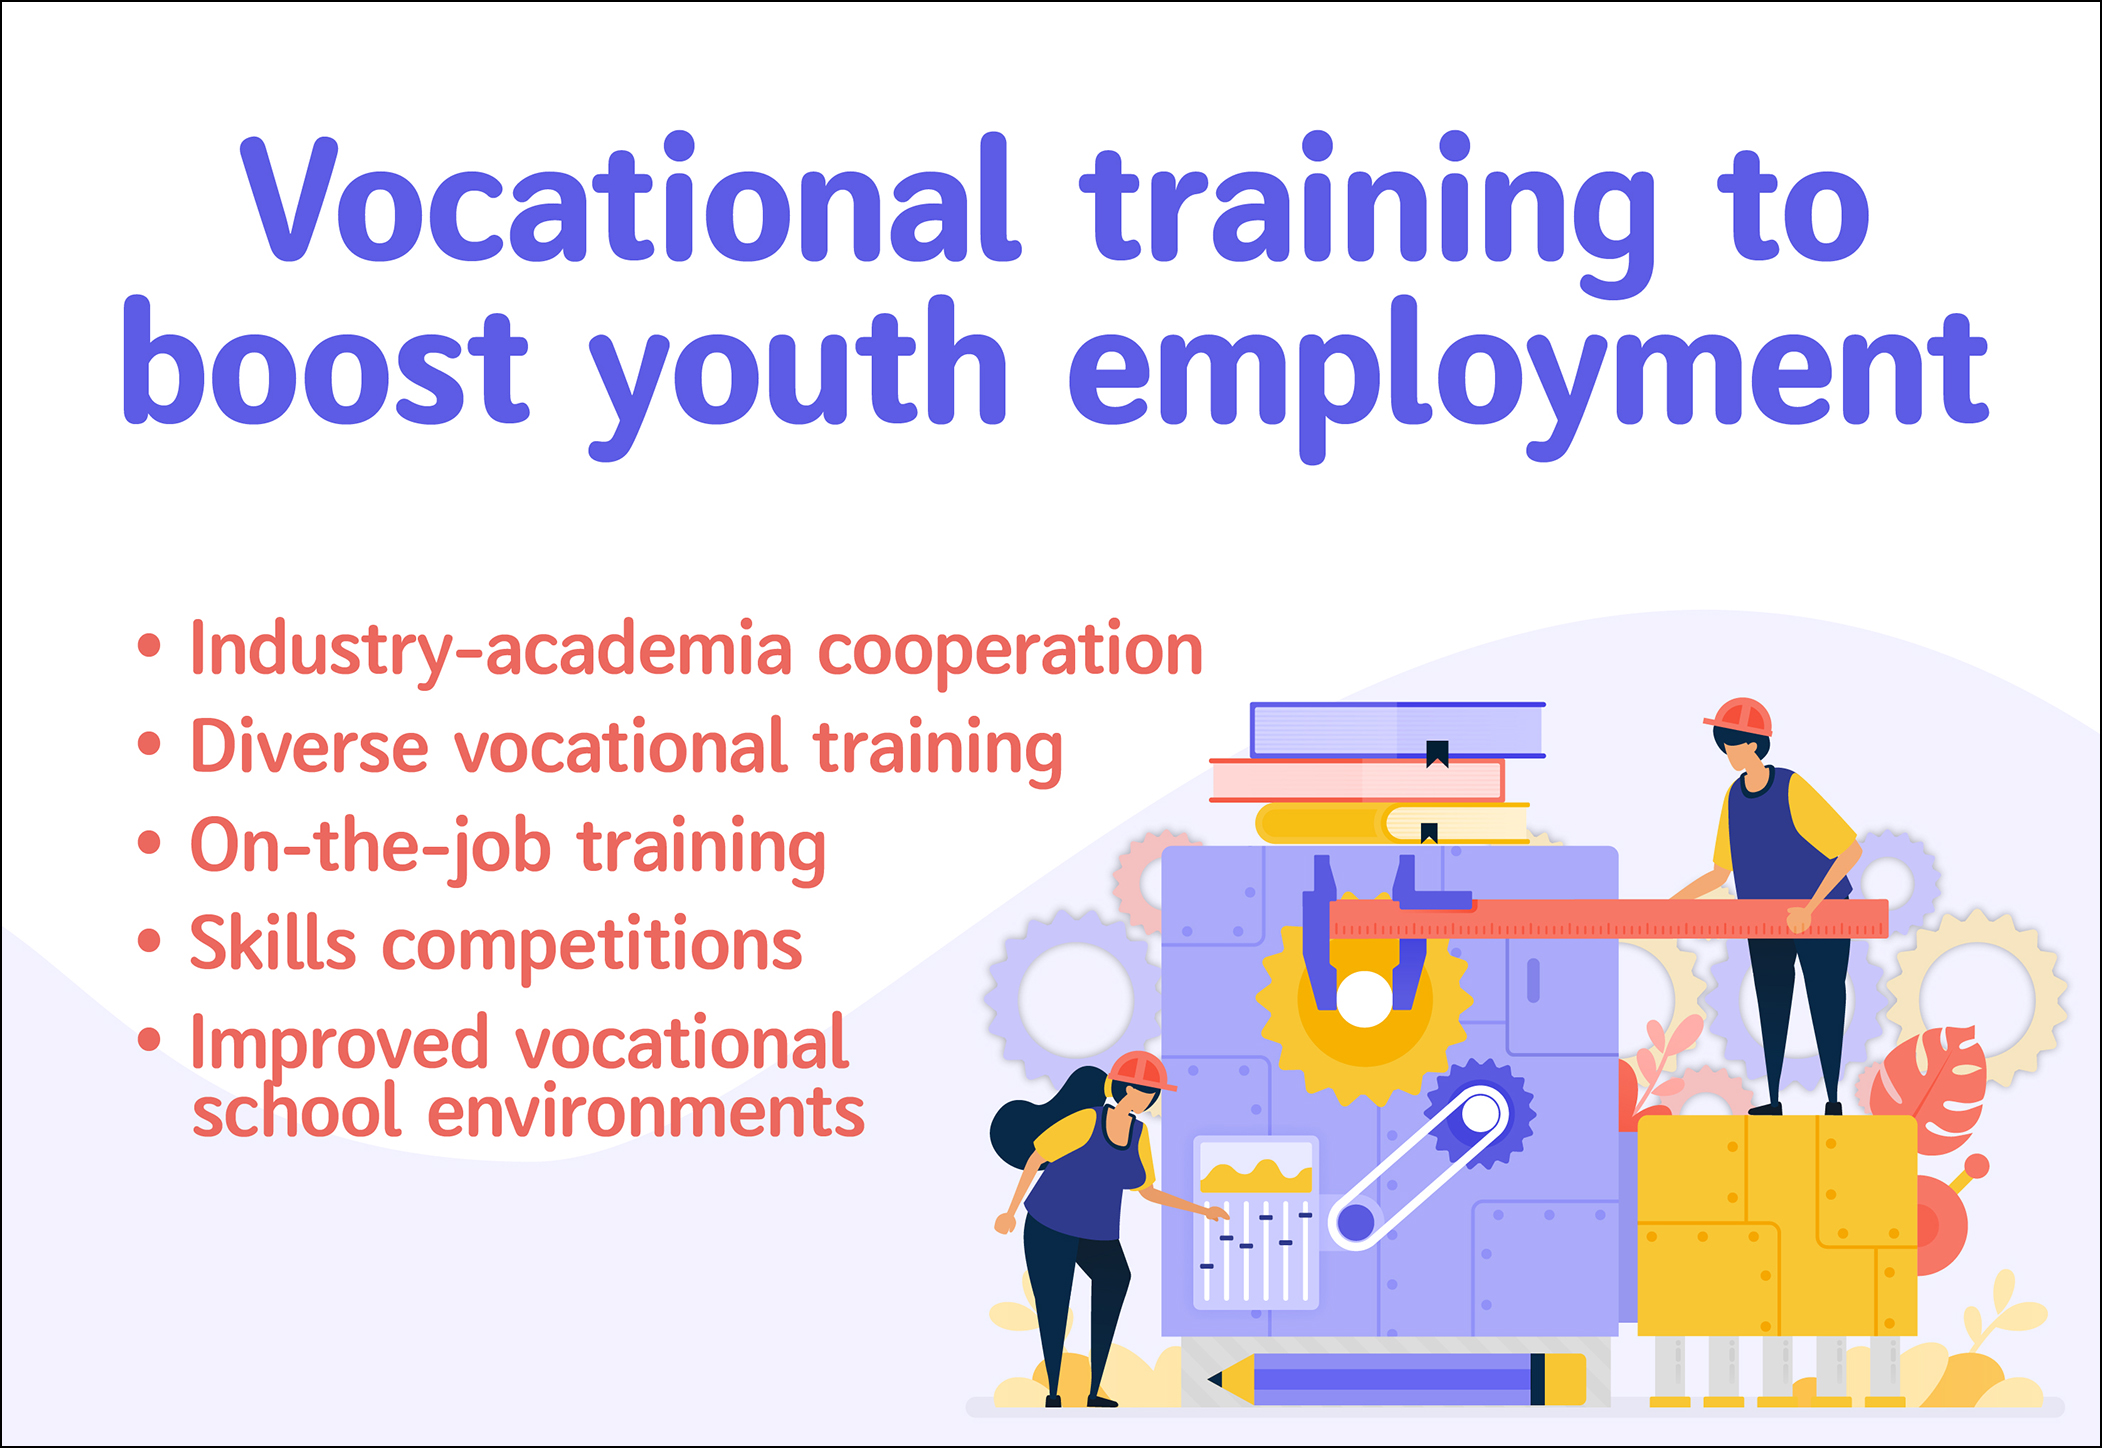 Youth vocational training